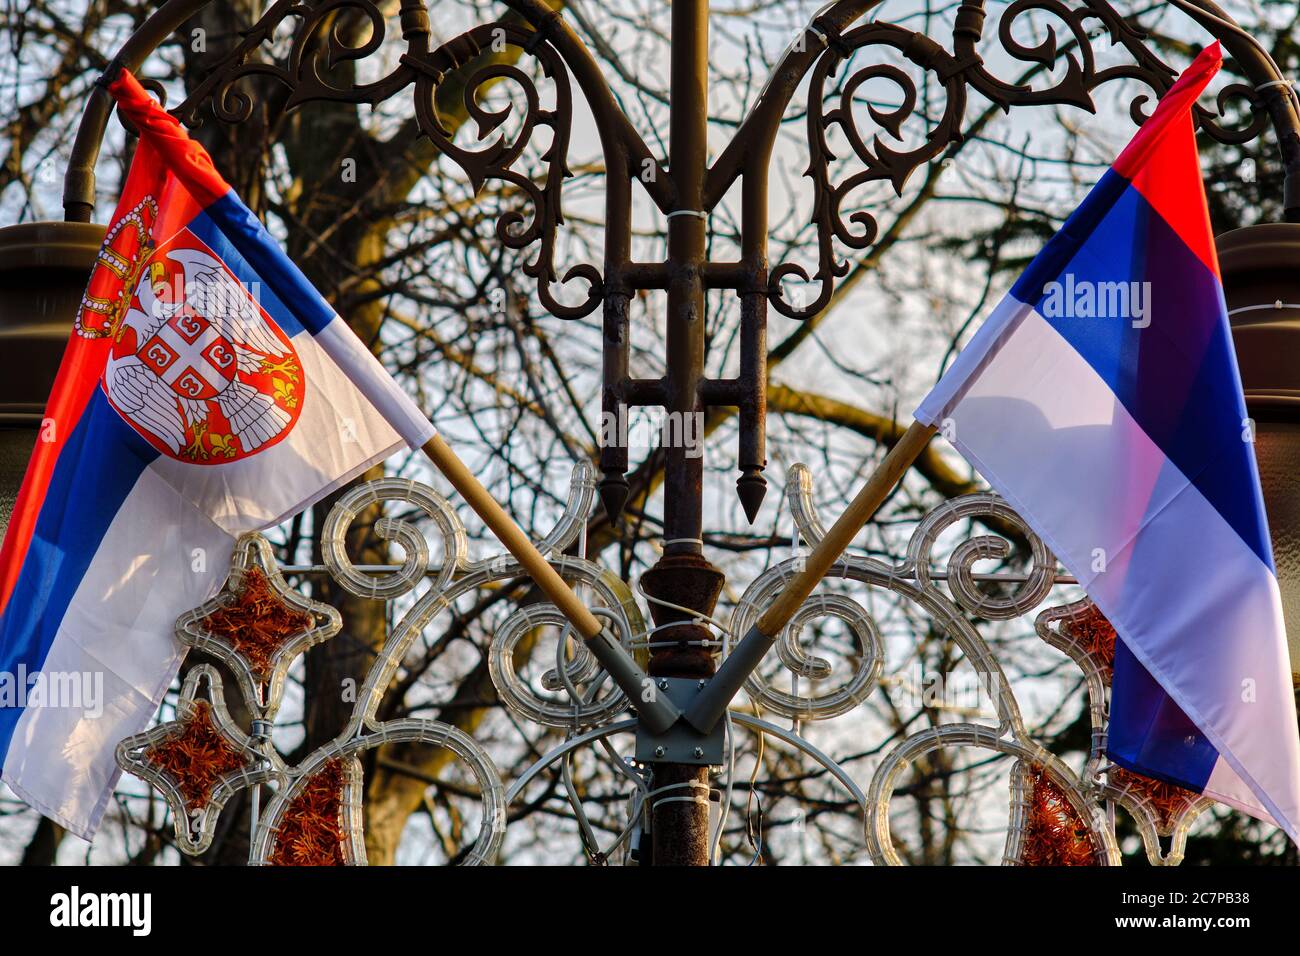 Flags of the Republic of Serbia in Belgrade fortress Kalemegdan park during the National Day celebration (Statehood Day of Serbia - Sretenje), in Belg Stock Photo